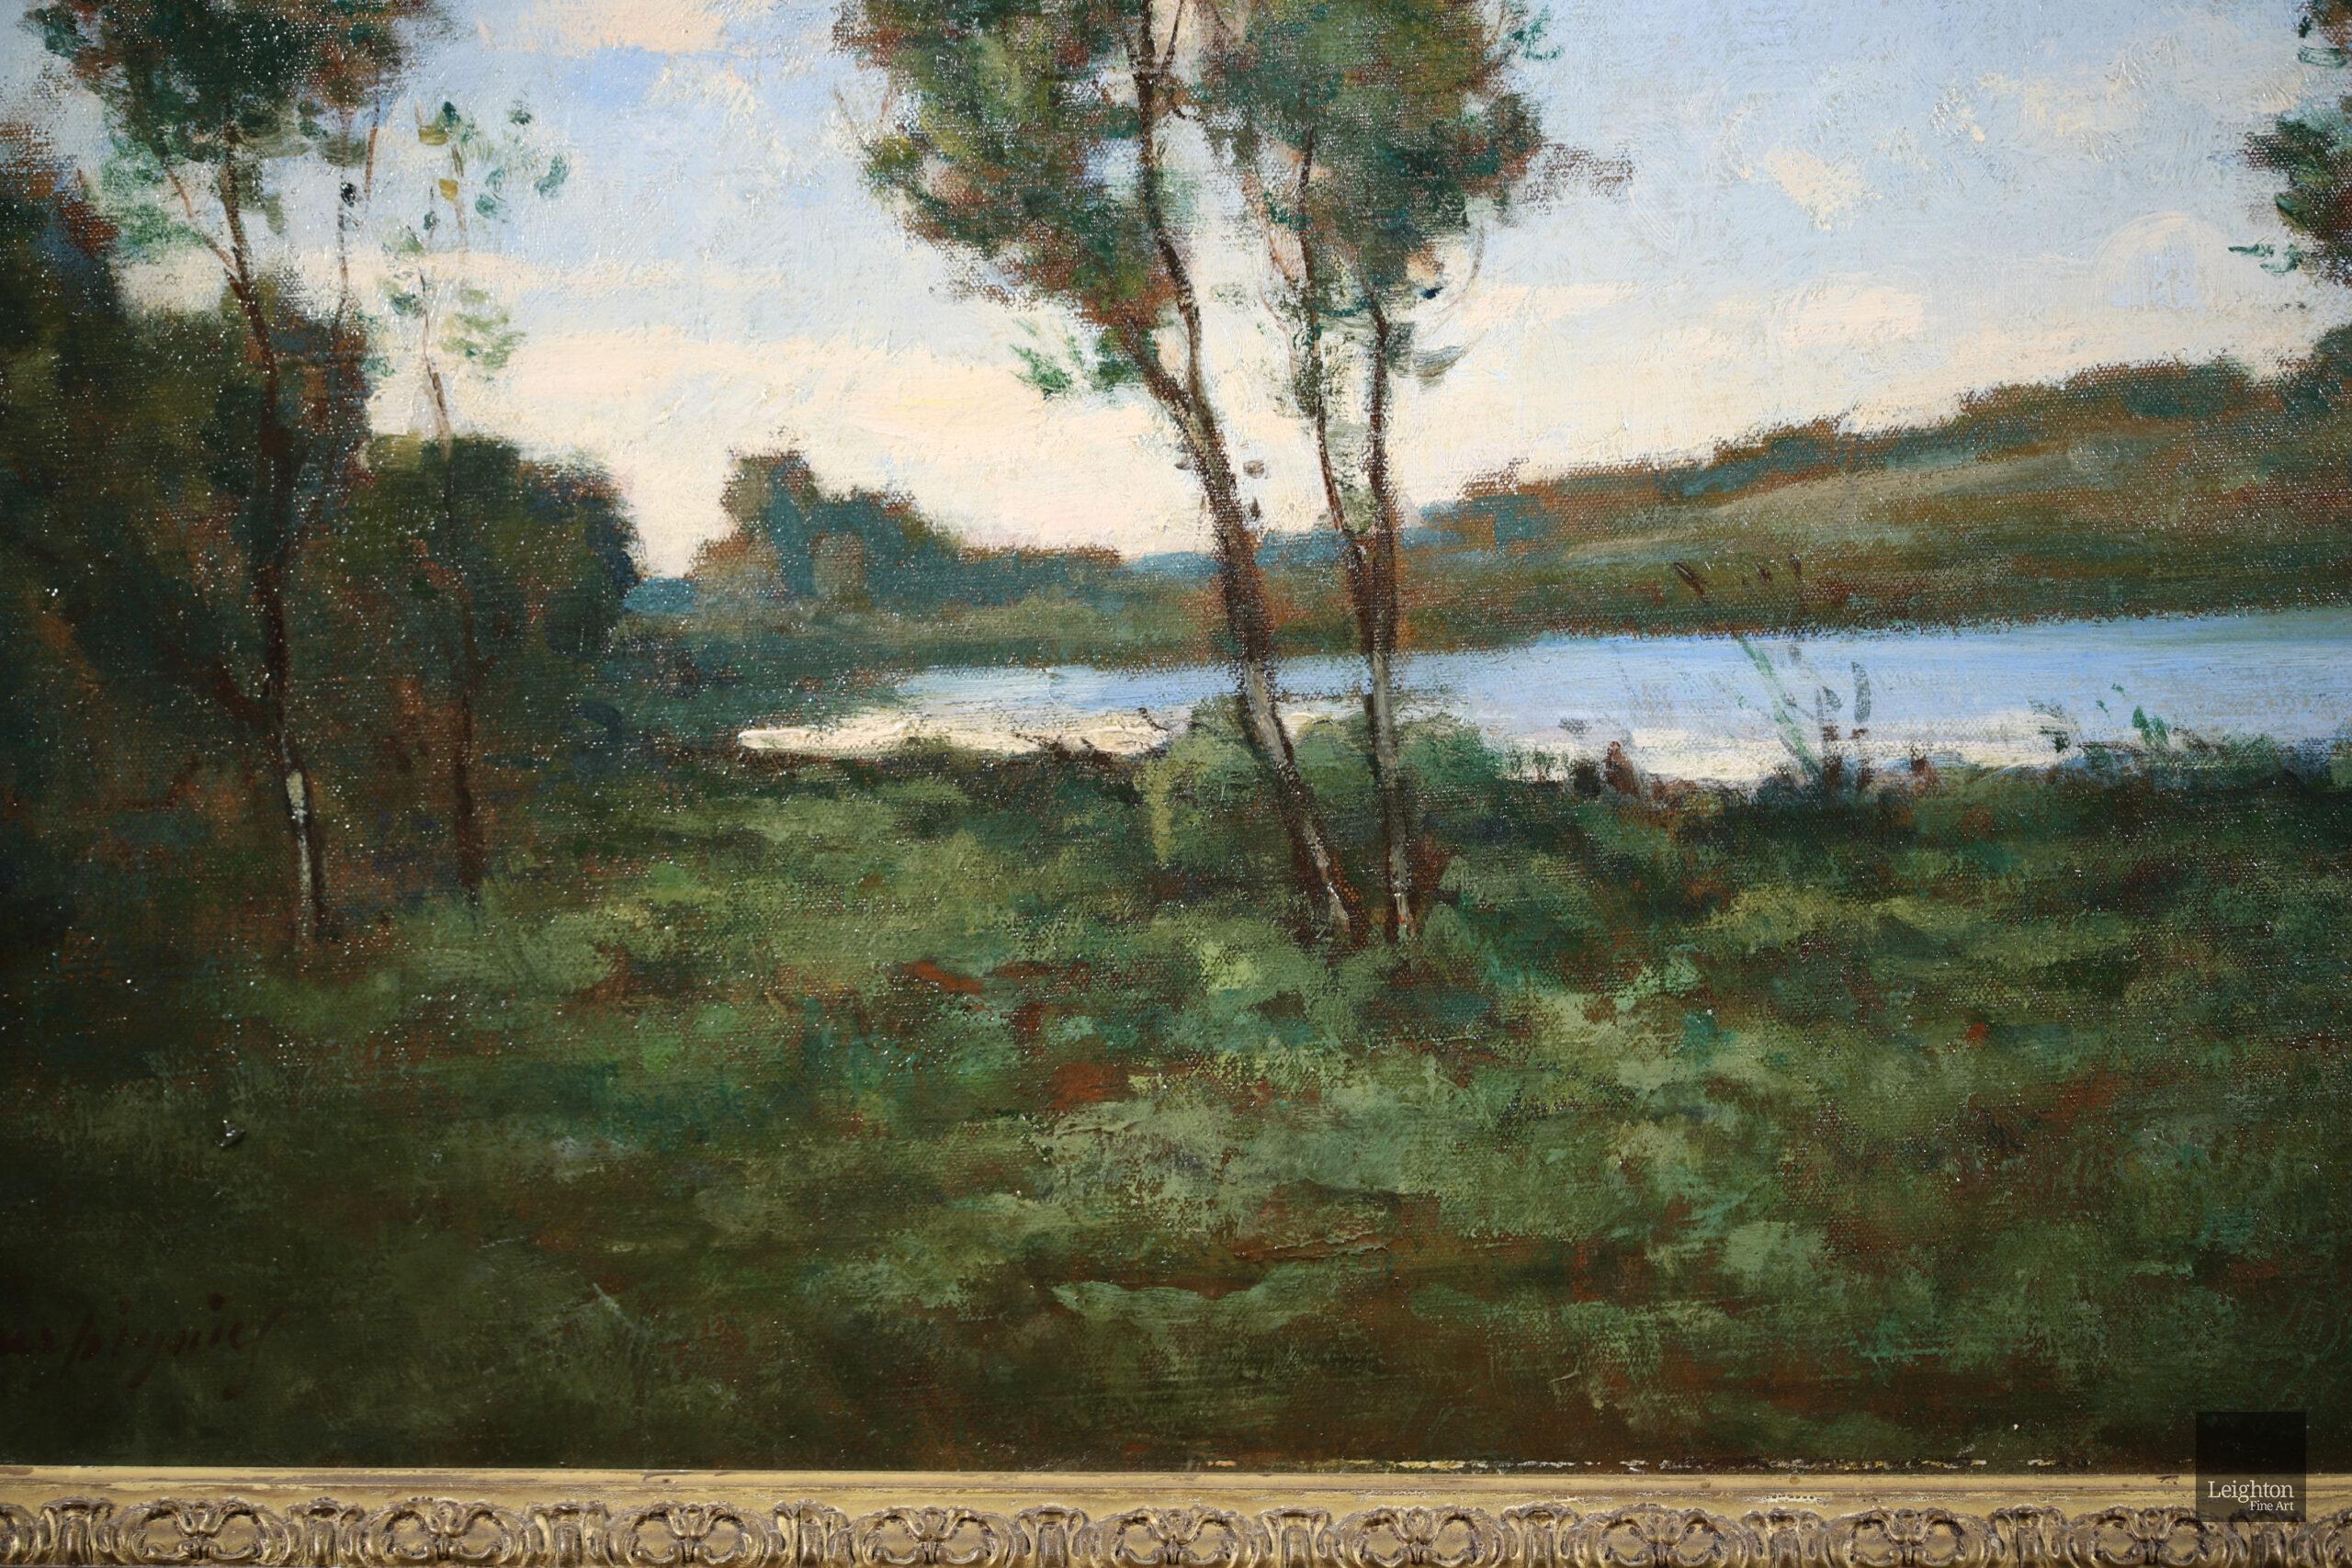 A superb large signed oil on canvas by the french Barbizon painter Henri Harpignies. This work depicts a landscape by the edge of a lake with Harpignies' signature tall birch trees prominent by the waters edge. The painting is in very good condition